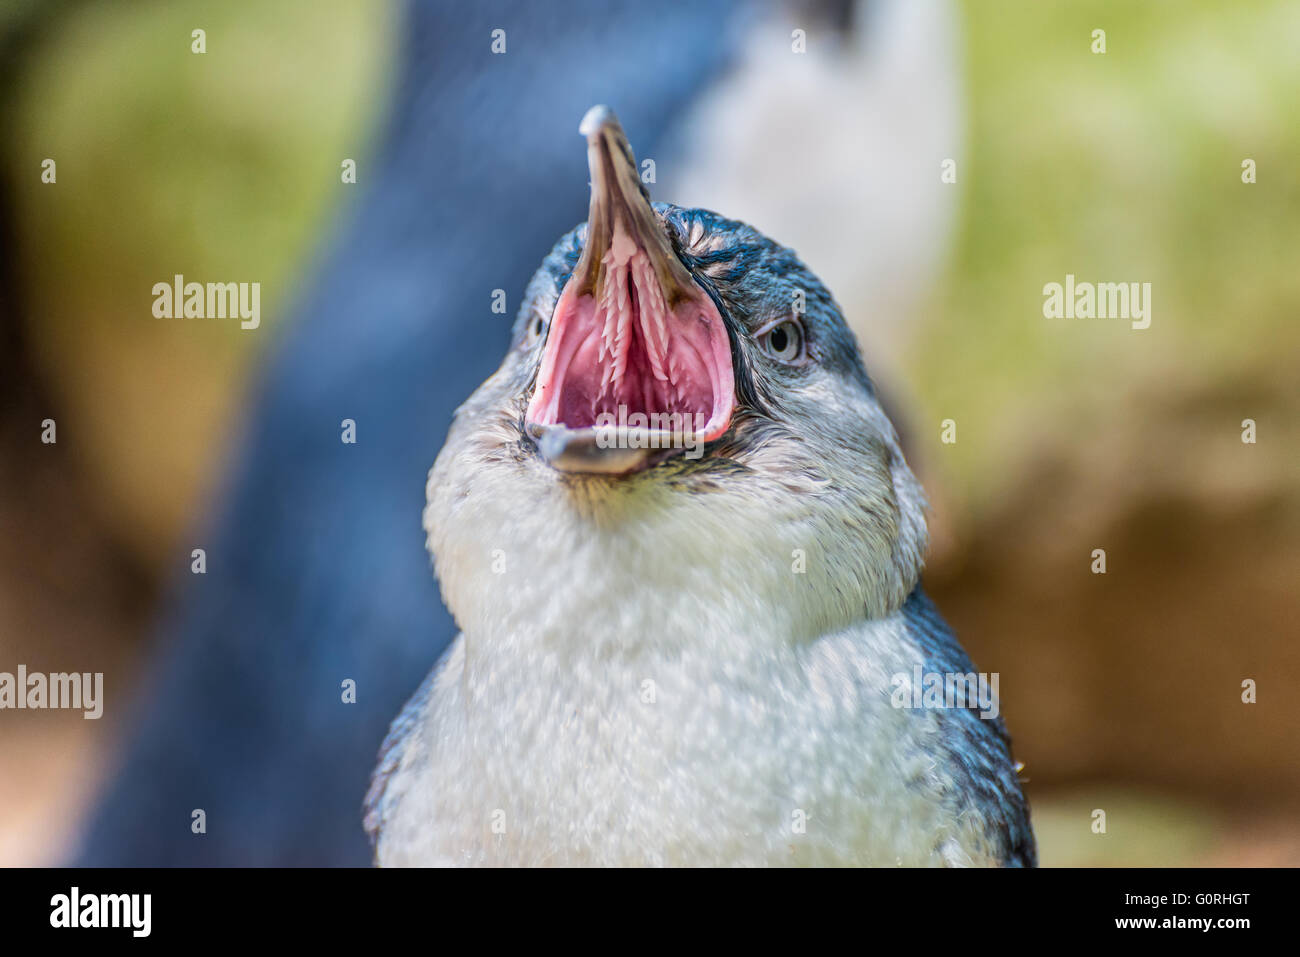 Penguin close up portrait with mouth wide open Stock Photo